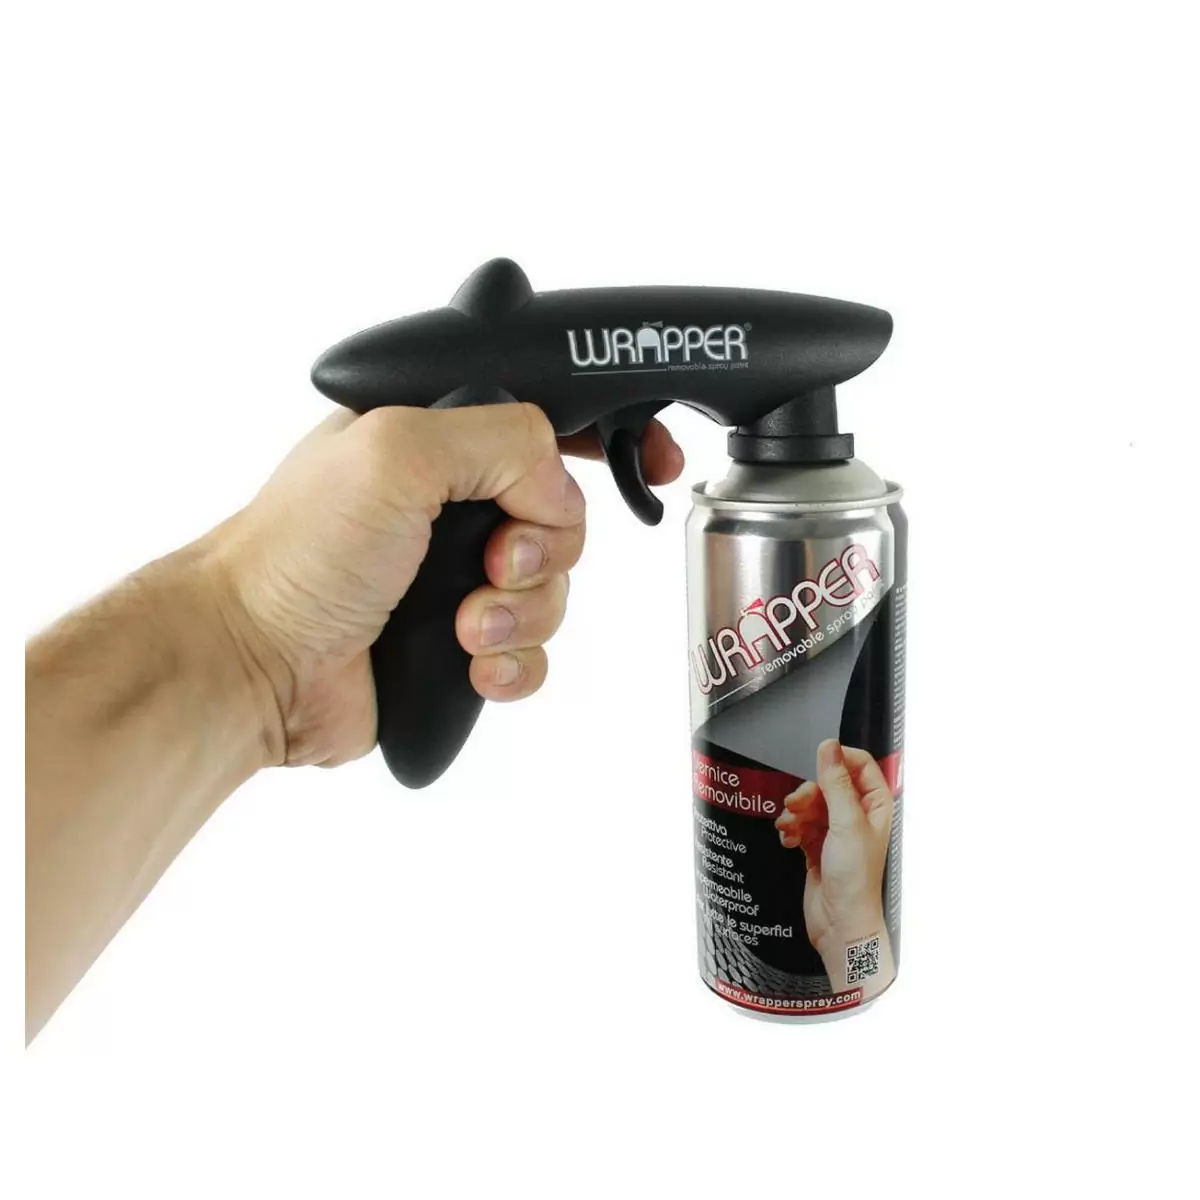 spray can tool with gun trigger for spray paint wrapper - image